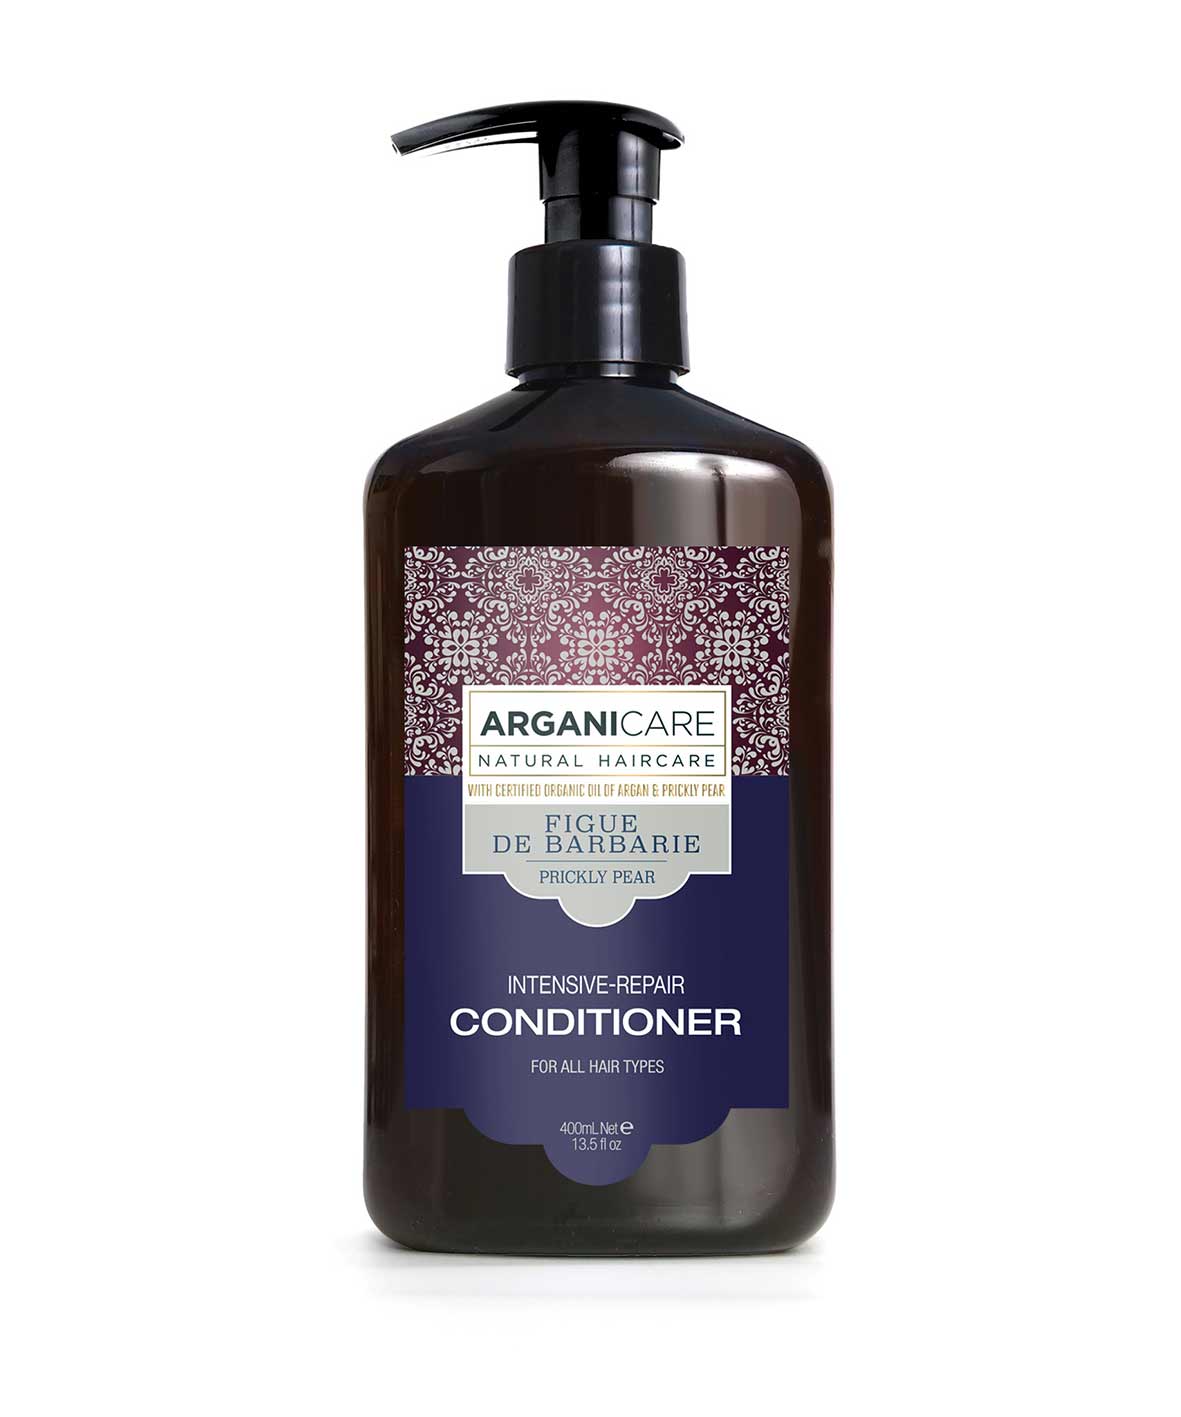 Arganicare - Prickly pear - "Intensive Repair" conditioner - 400 ml (Anti-waste Collection) - Arganicare - Ethni Beauty Market